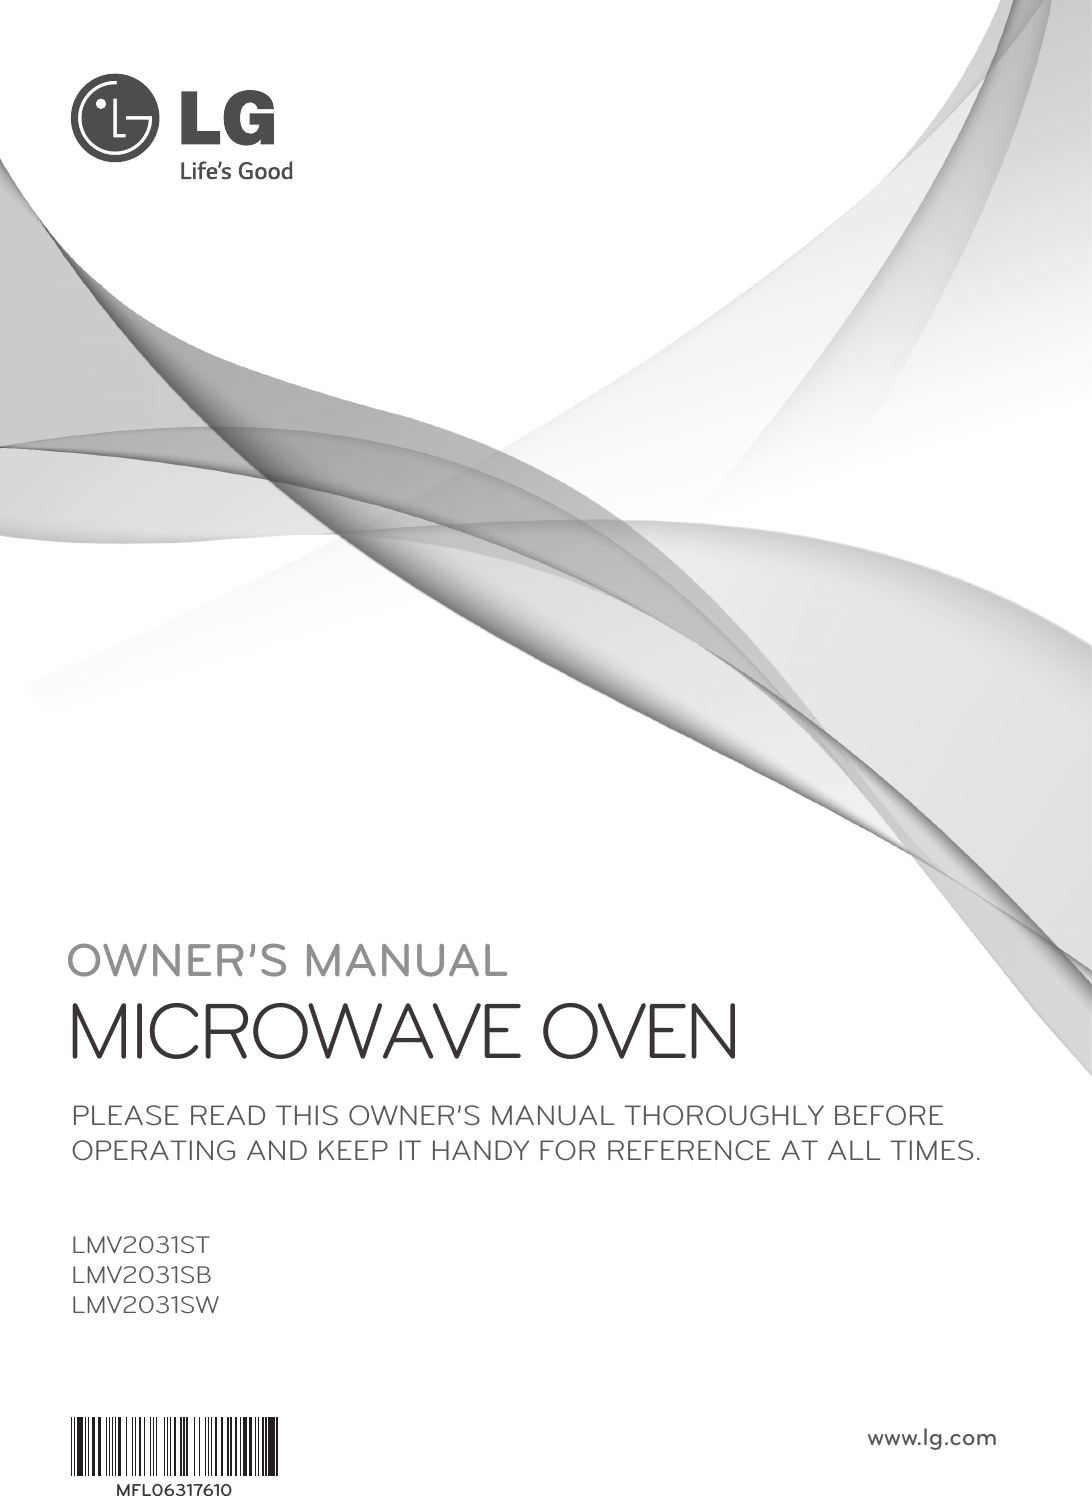 OWNER’S MANUALMICROWAVE OVENLMV2031STLMV2031SBLMV2031SWPLEASE READ THIS OWNER’S MANUAL THOROUGHLY BEFOREOPERATING AND KEEP IT HANDY FOR REFERENCE AT ALL TIMES.www.lg.comMFL06317610